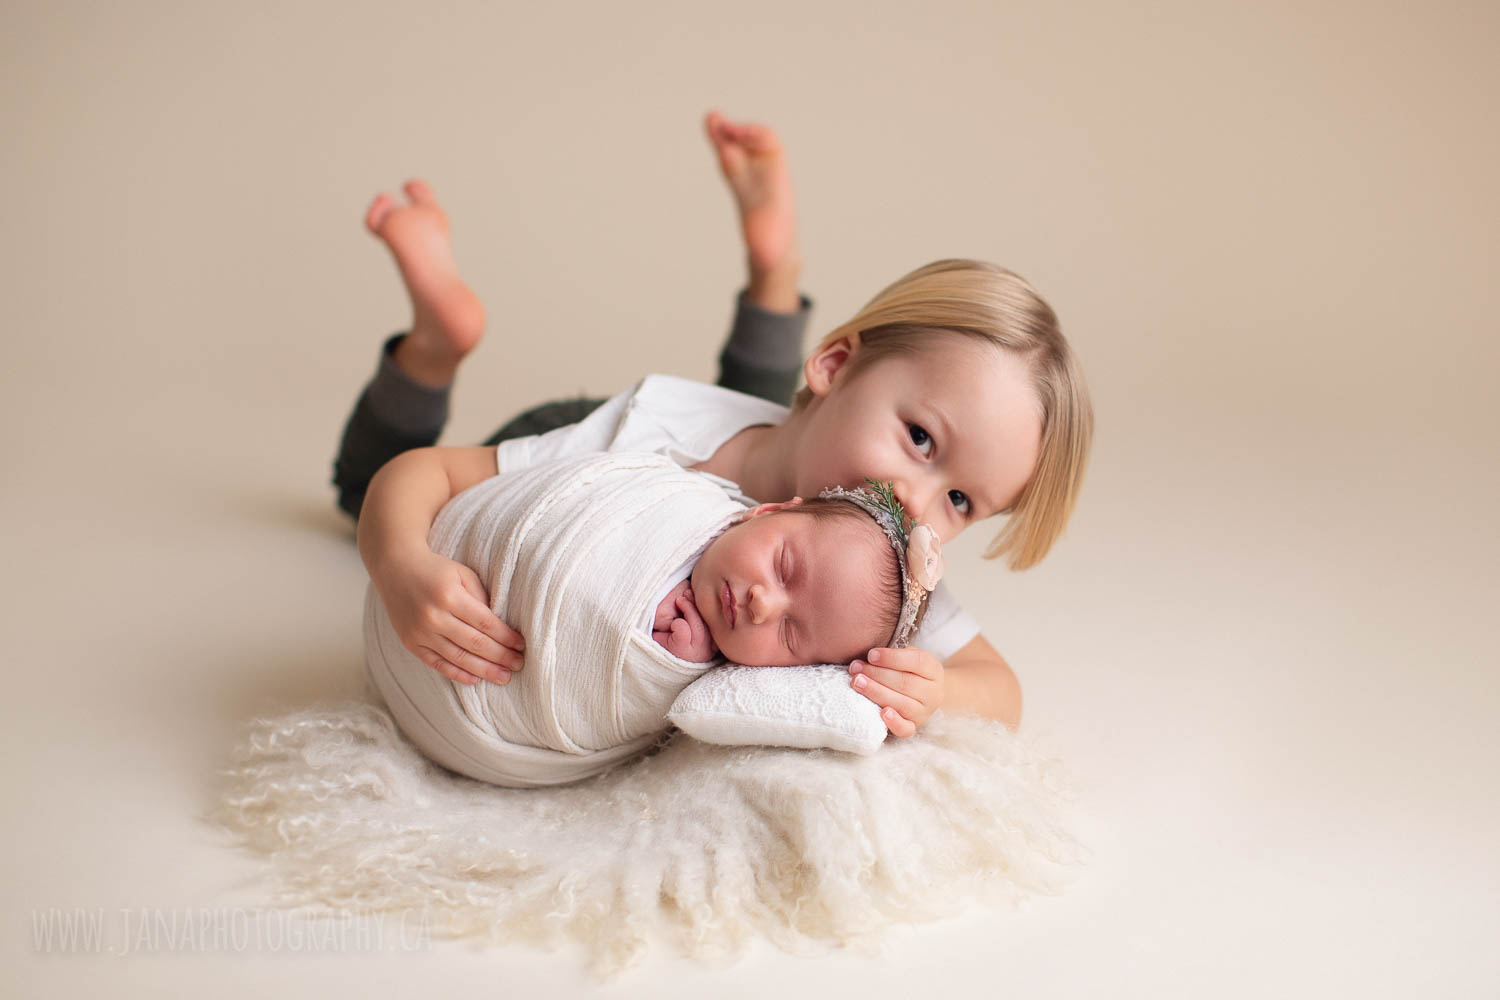 newborn photography with siblings - sister and brother - white setup 